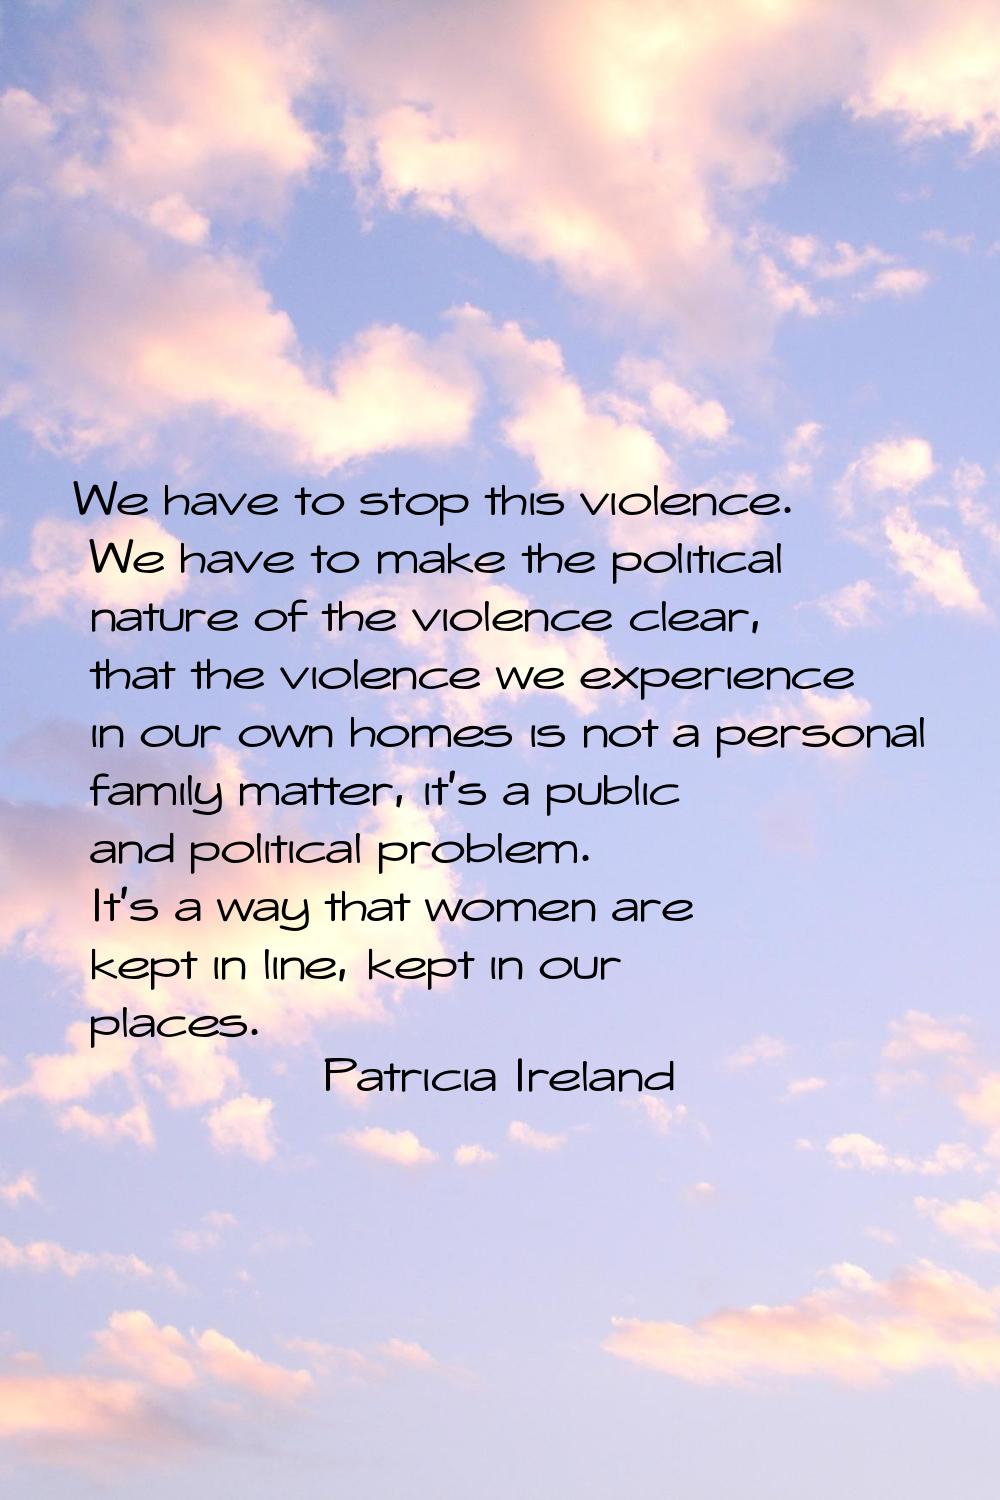 We have to stop this violence. We have to make the political nature of the violence clear, that the